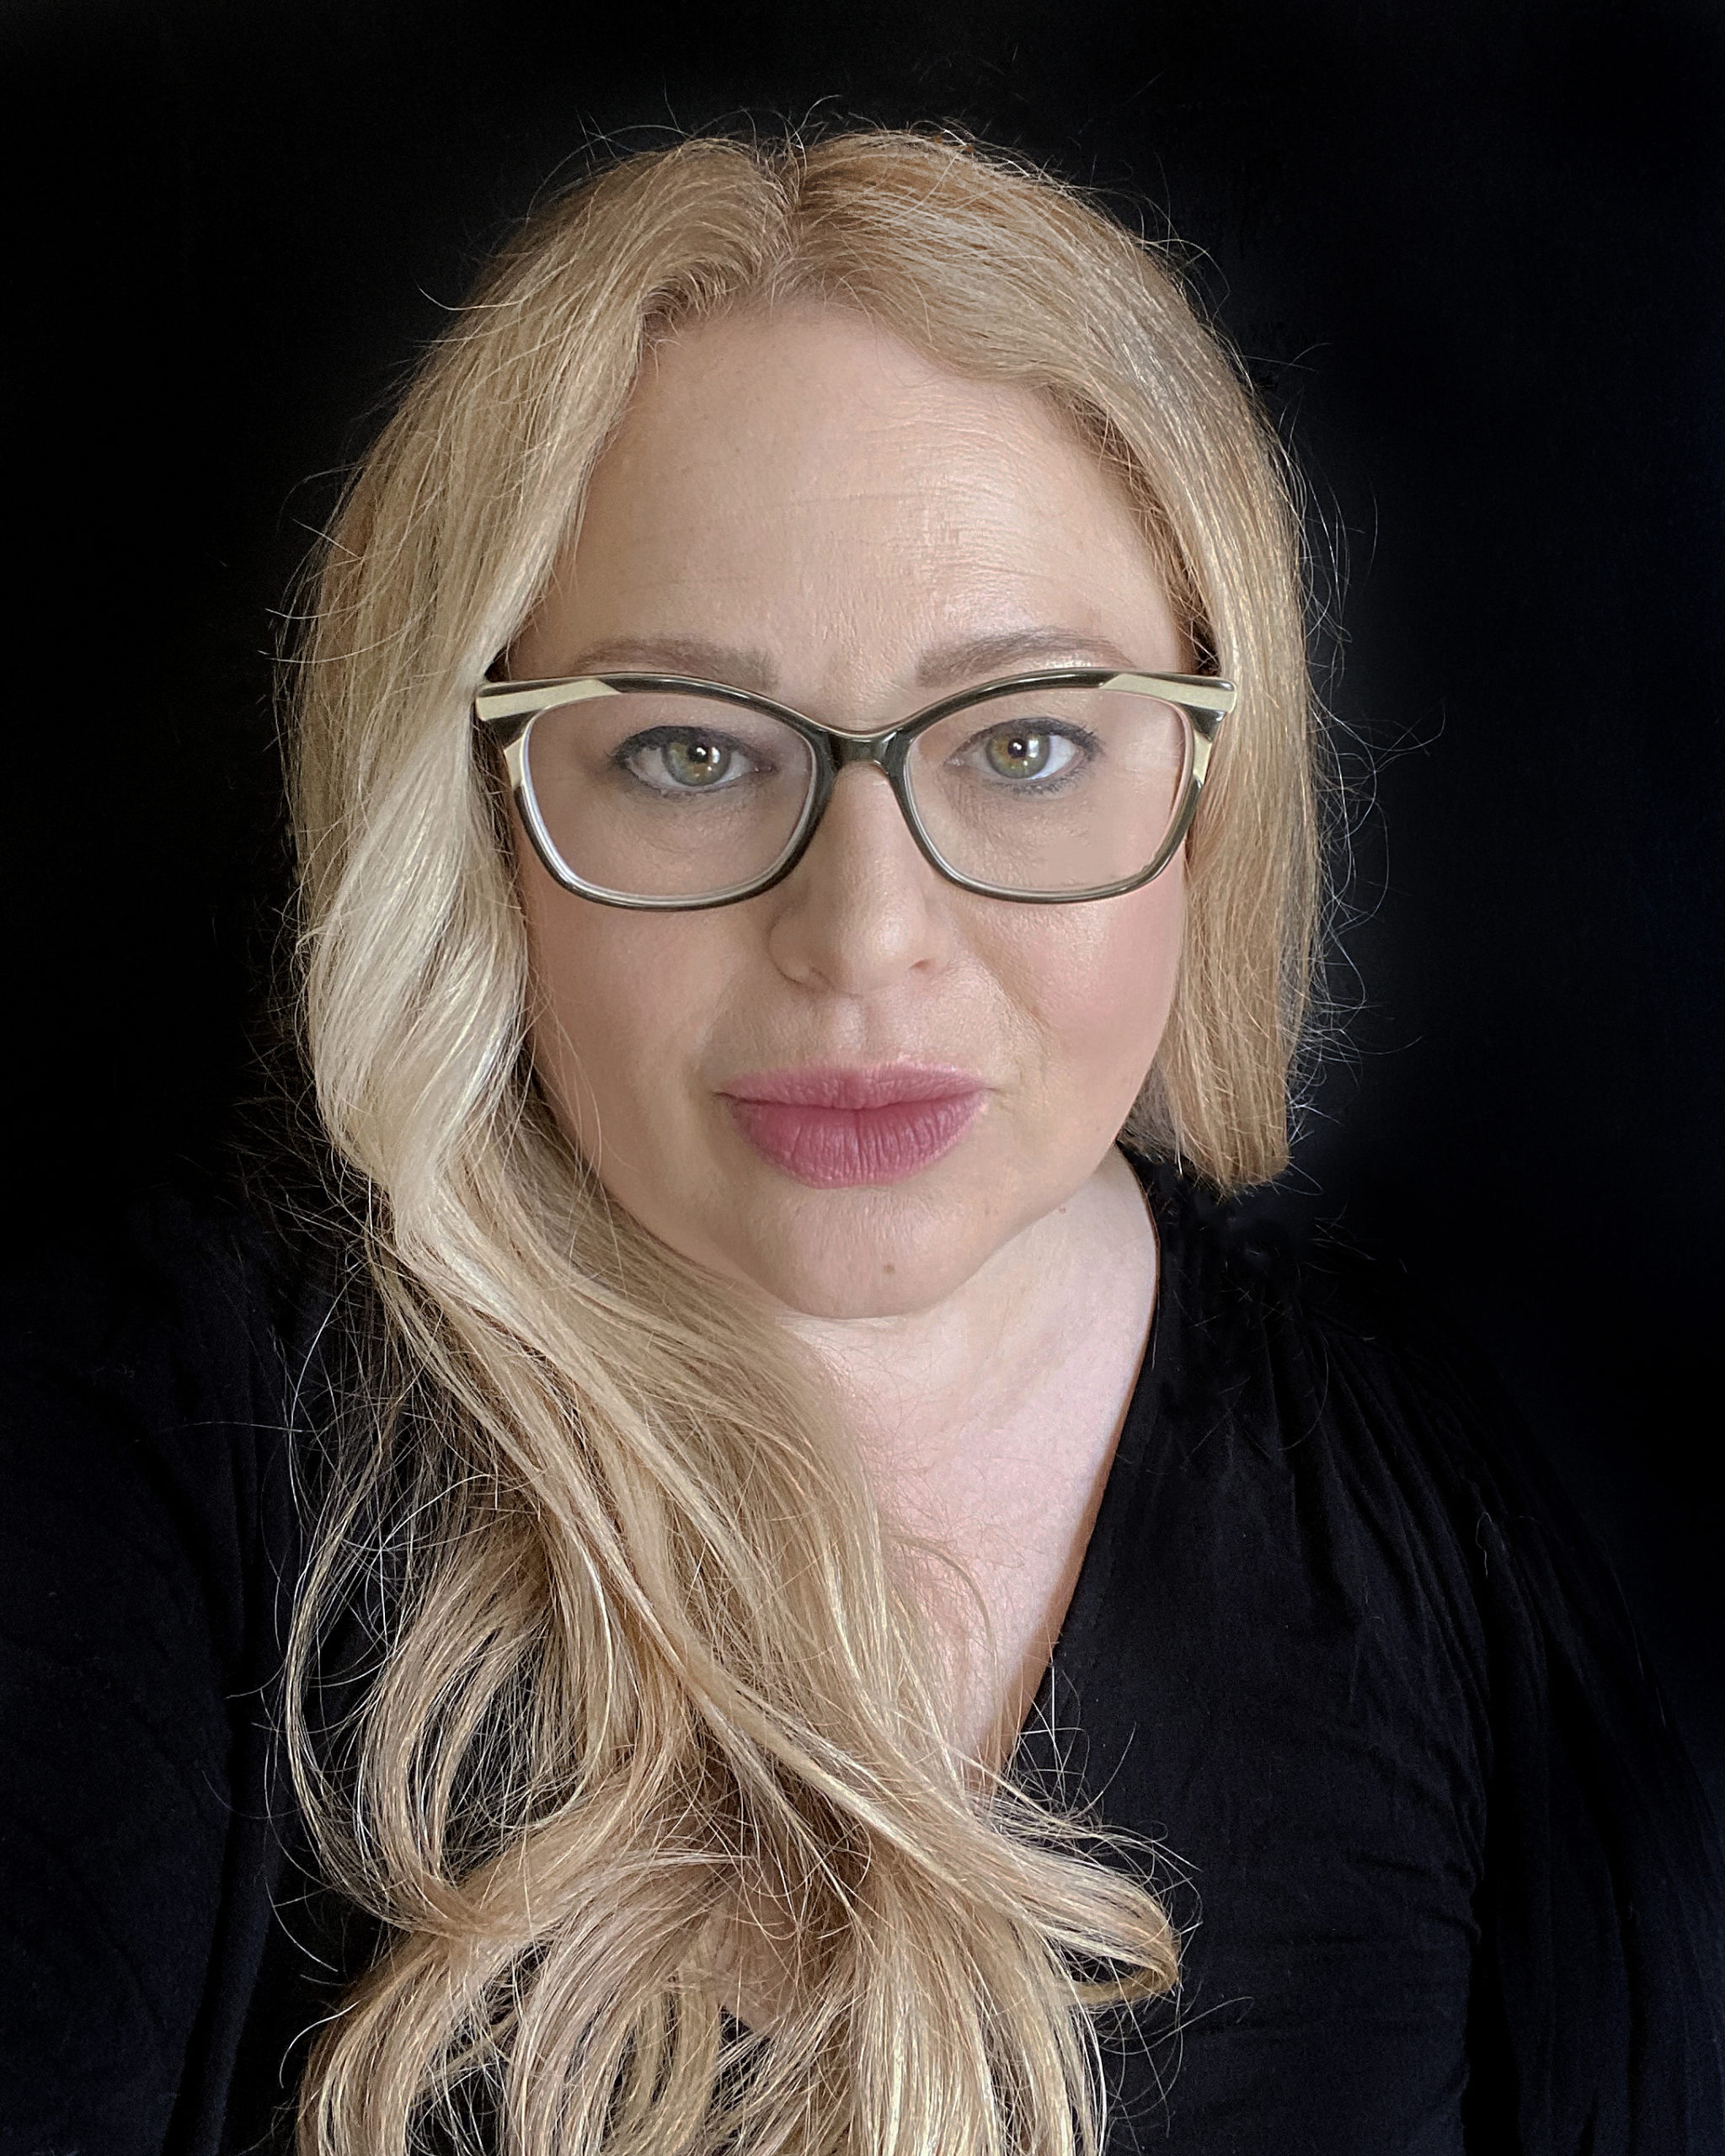 Headshot of Traer Scott, a blonde woman with long hair and glasses